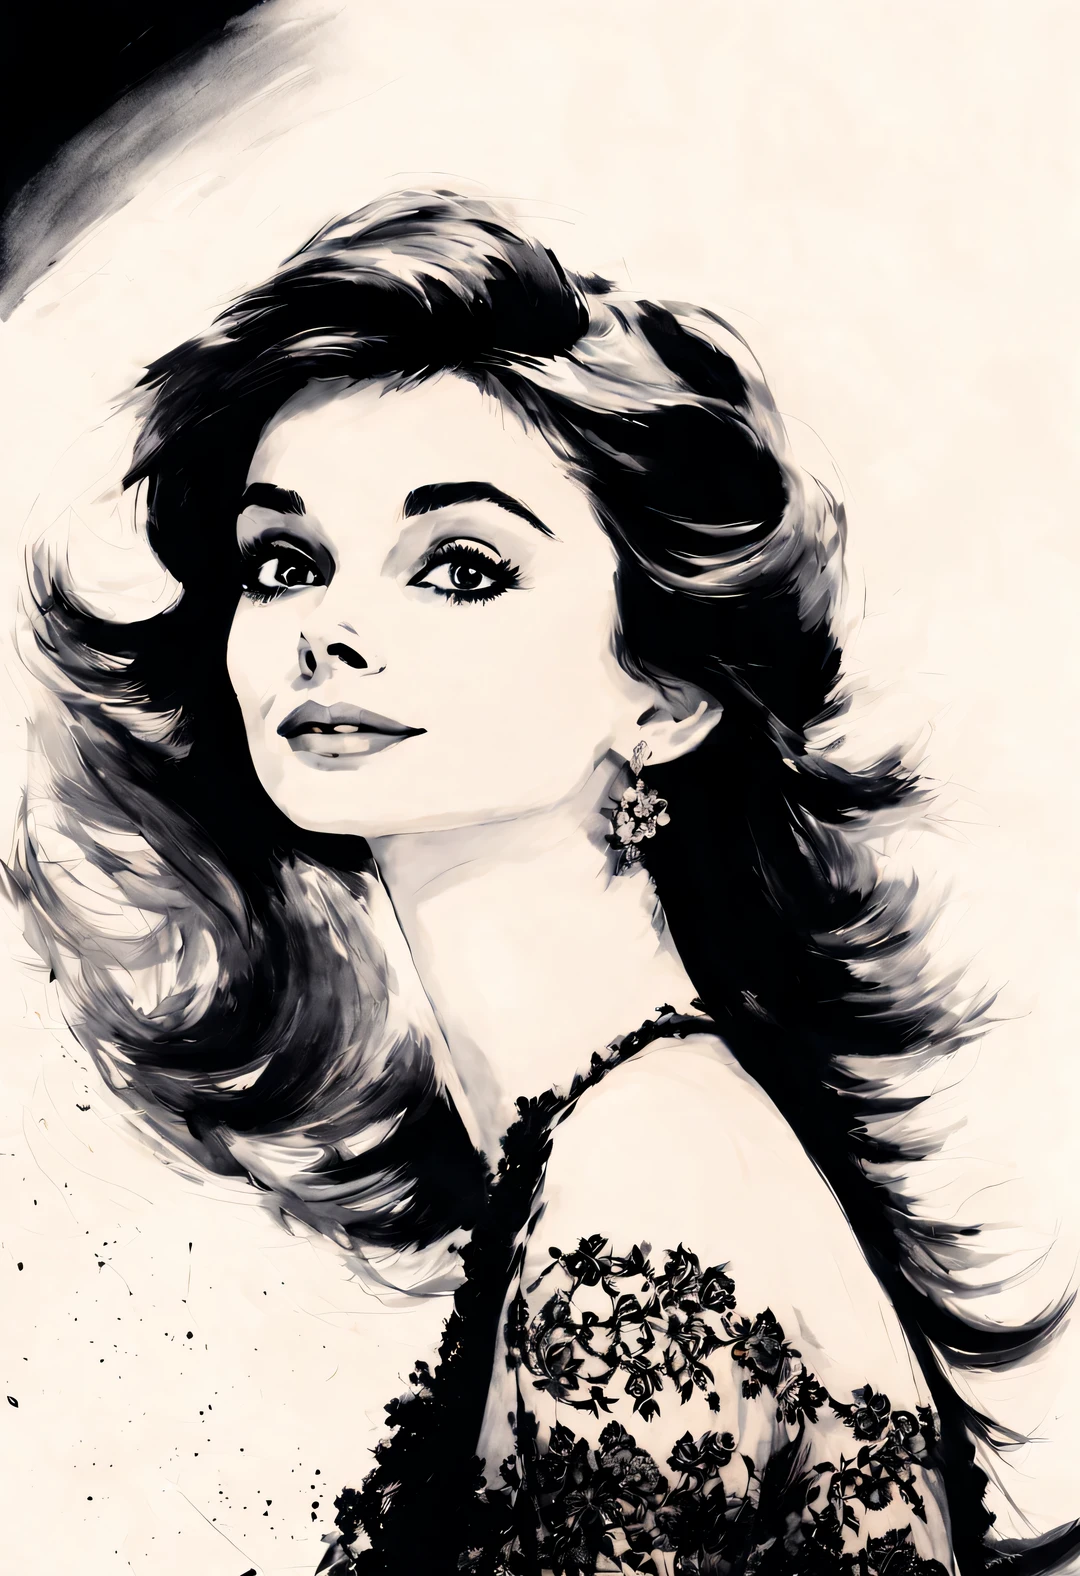 Ink art style, (Audrey Hepburn elegantly puts her hands on her chest), (Wear high-end lace evening gown gloves), White background, dramatic contrast, Hair texture clear and shiny, Emphasis on the depiction of exceptionally beautiful and bright eyes, smooth skin, portrait, beautiful details, Super intricate and refined details, Outline with black ink, smooth lines, Express the characters’ expressions and postures through the contrast of ink shades. Simple background, Emphasis on light, shadow, and a sense of space,